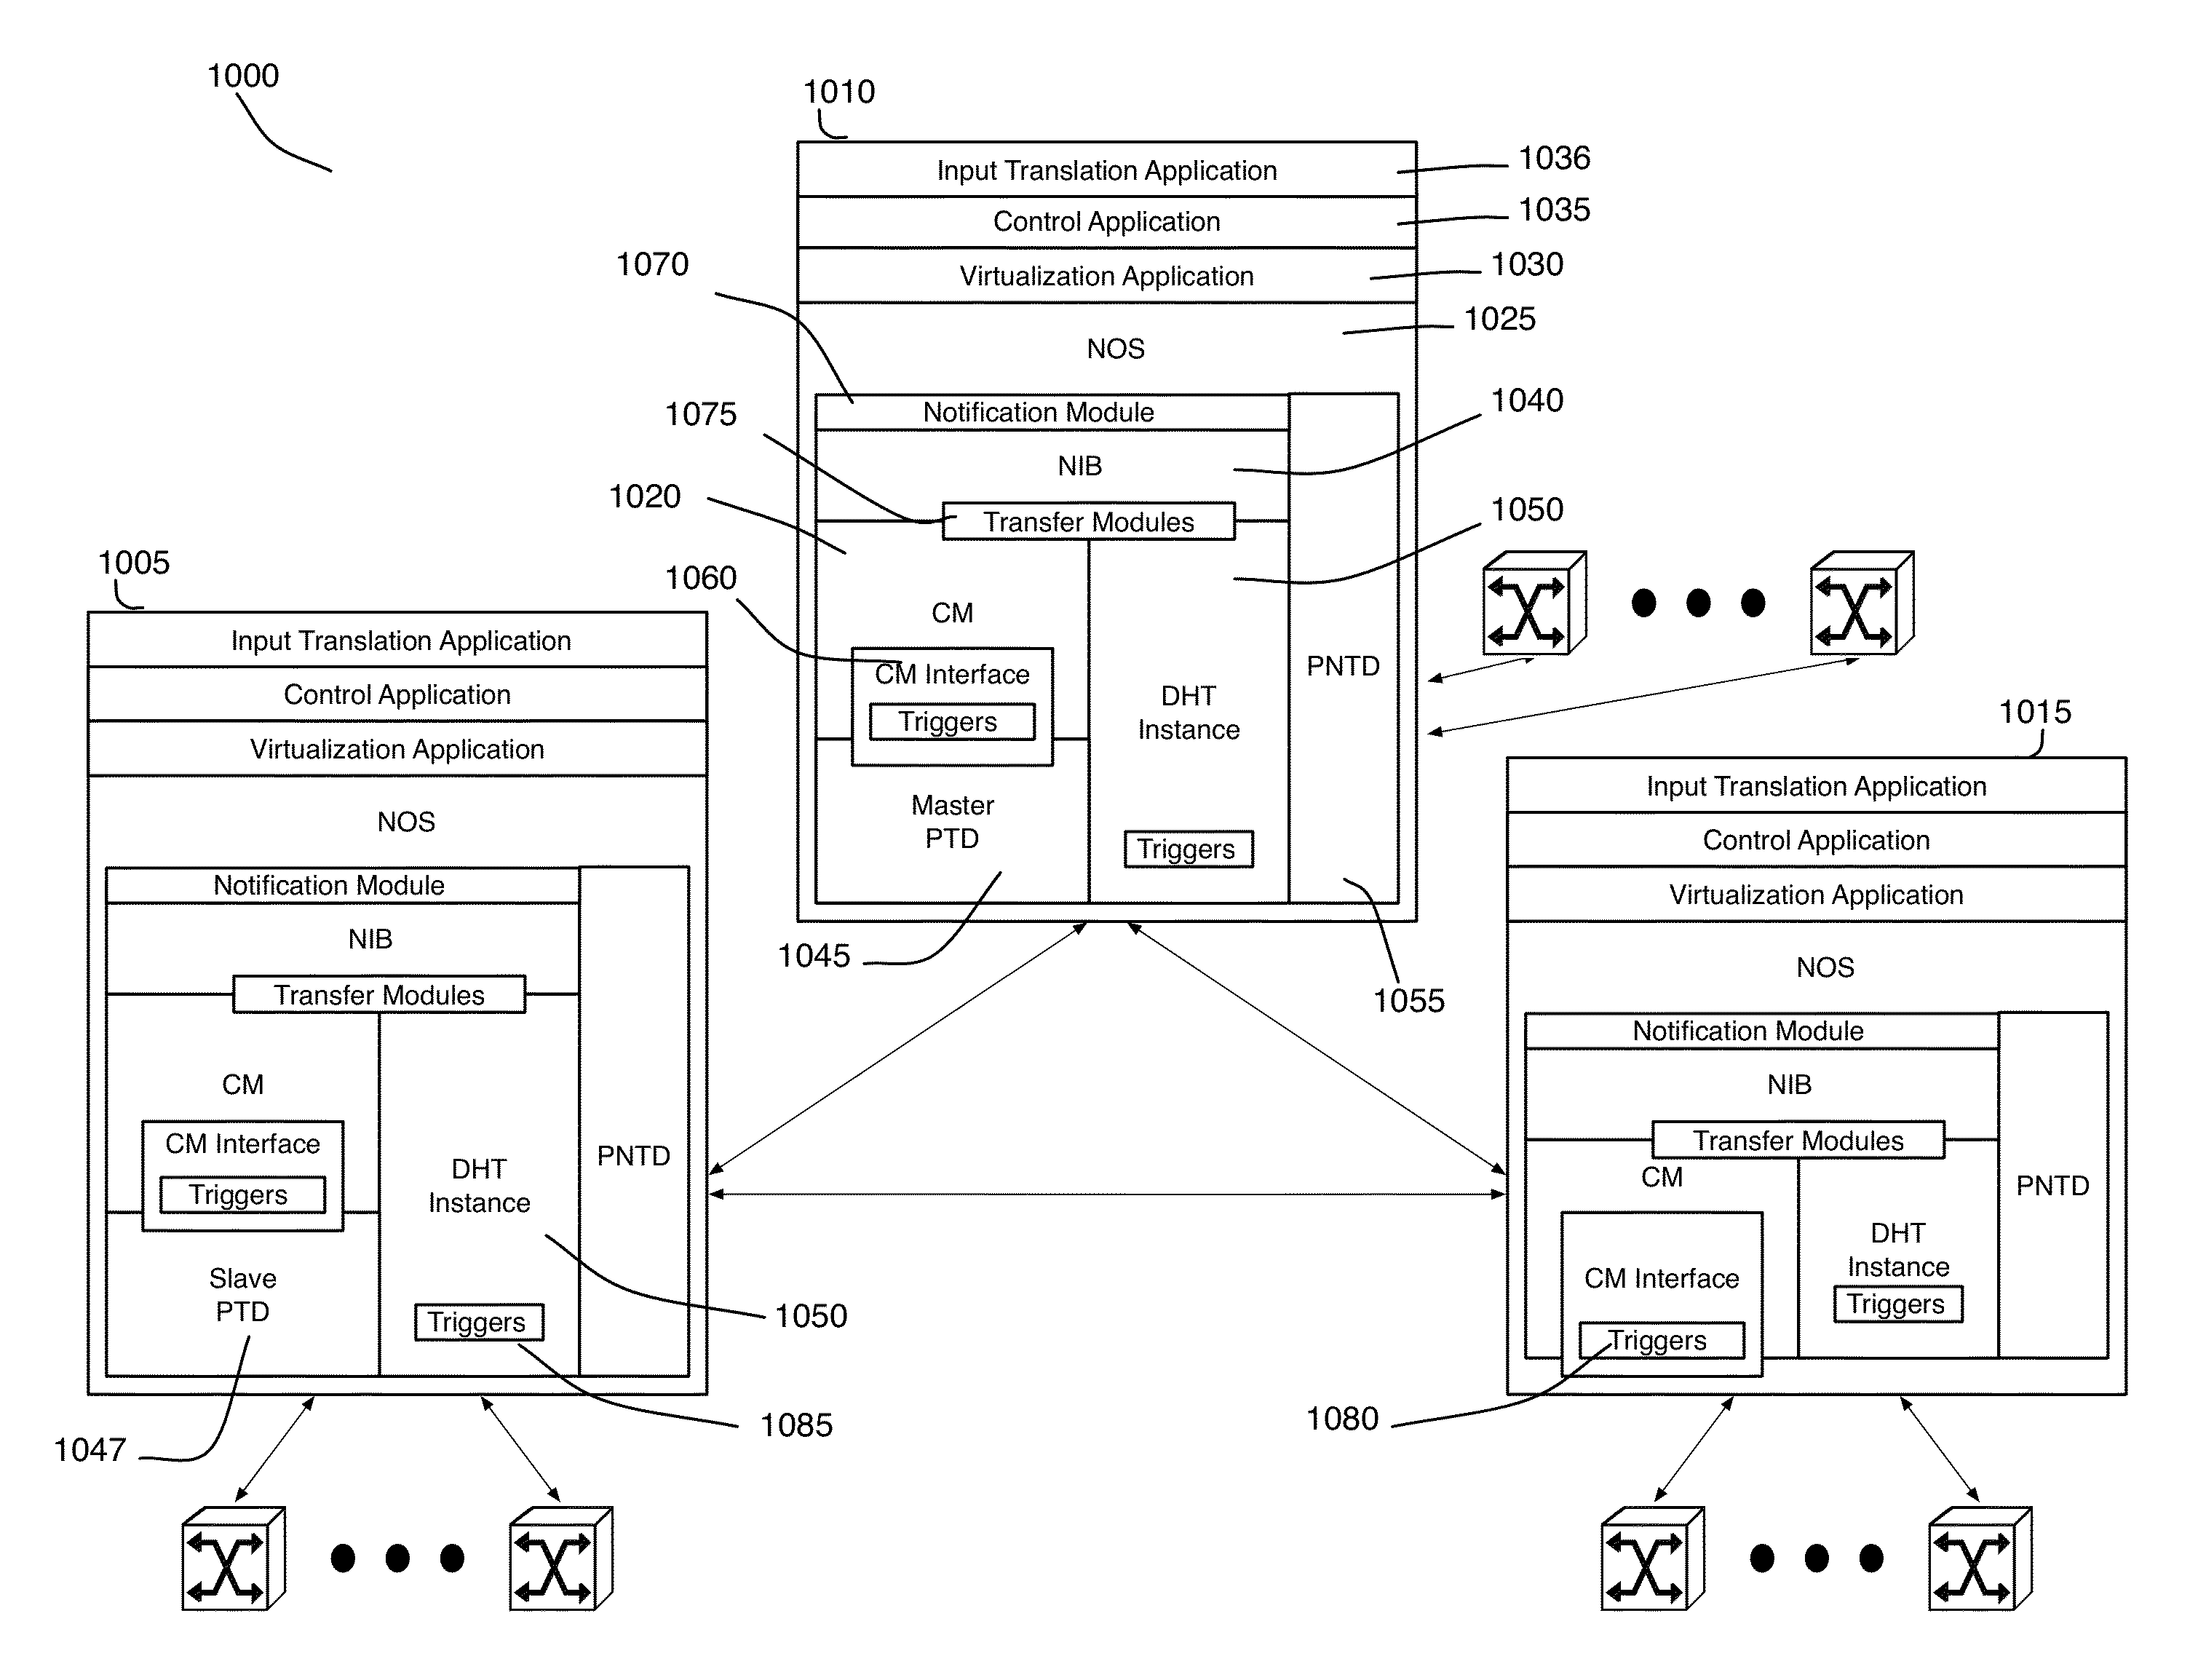 Network virtualization apparatus and method with scheduling capabilities